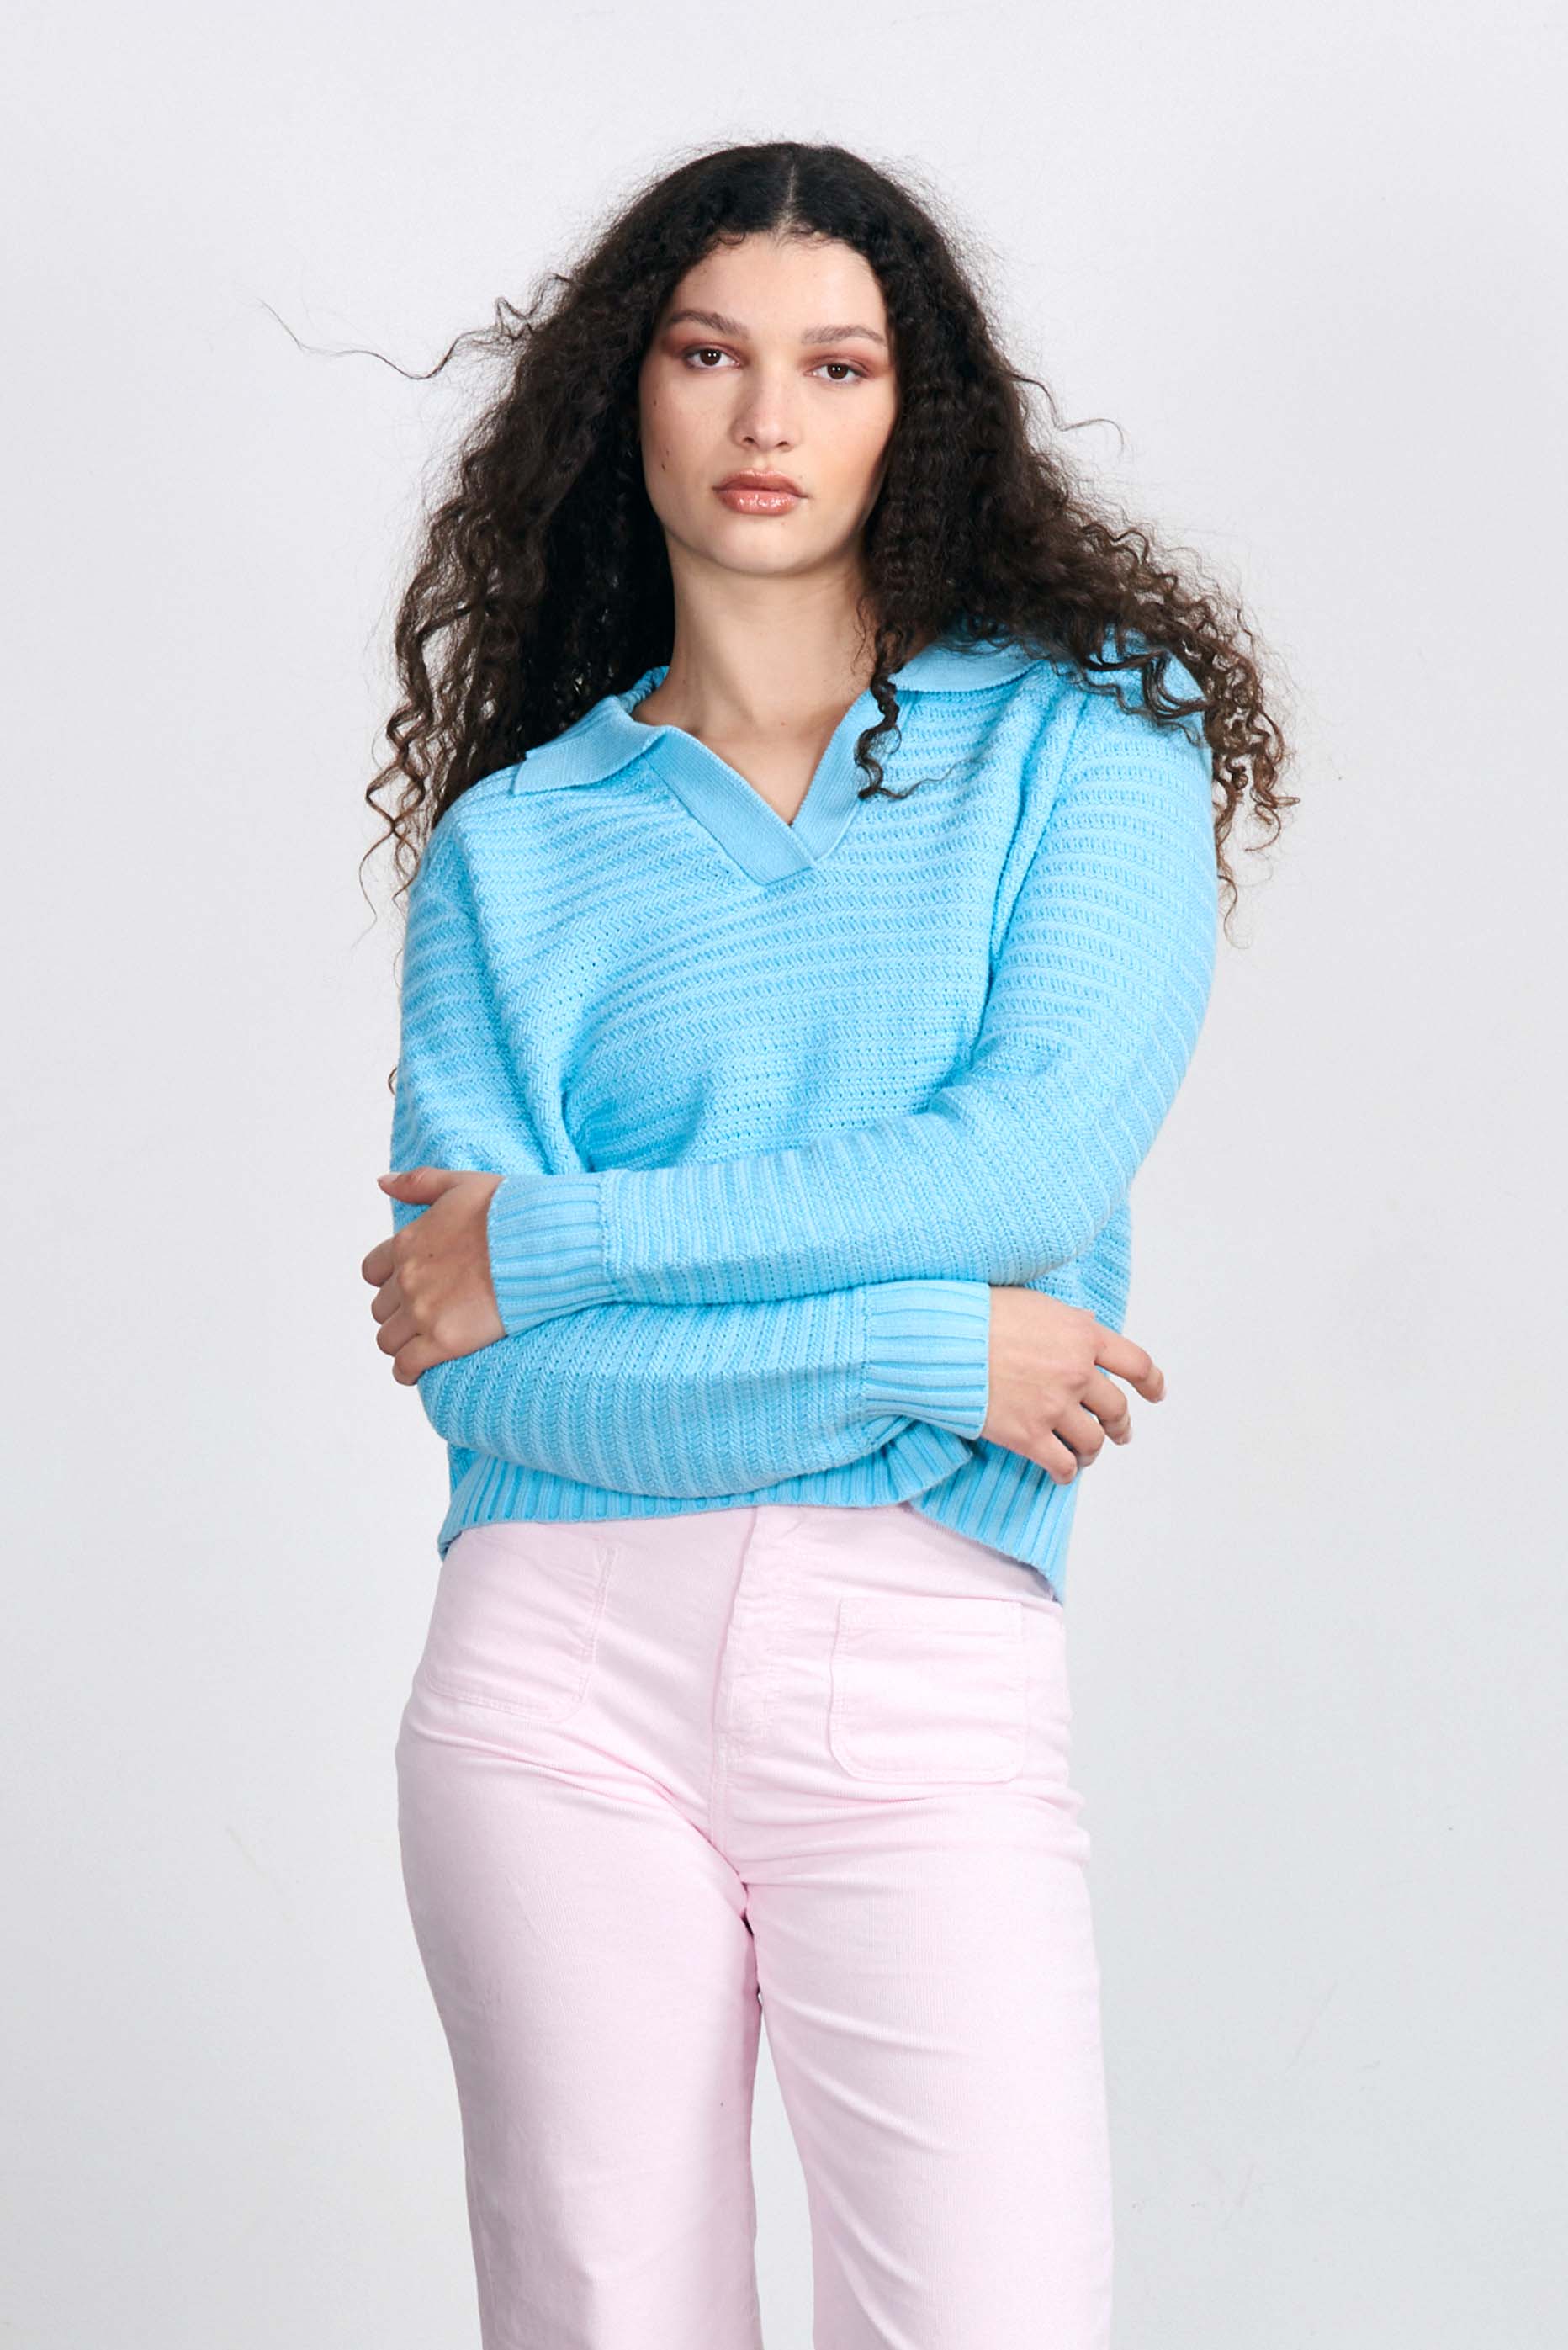 Brown haired female model wearing Jumper1234 Opal blue cotton jumper with a collar in a fabulous all over herringbone stitch